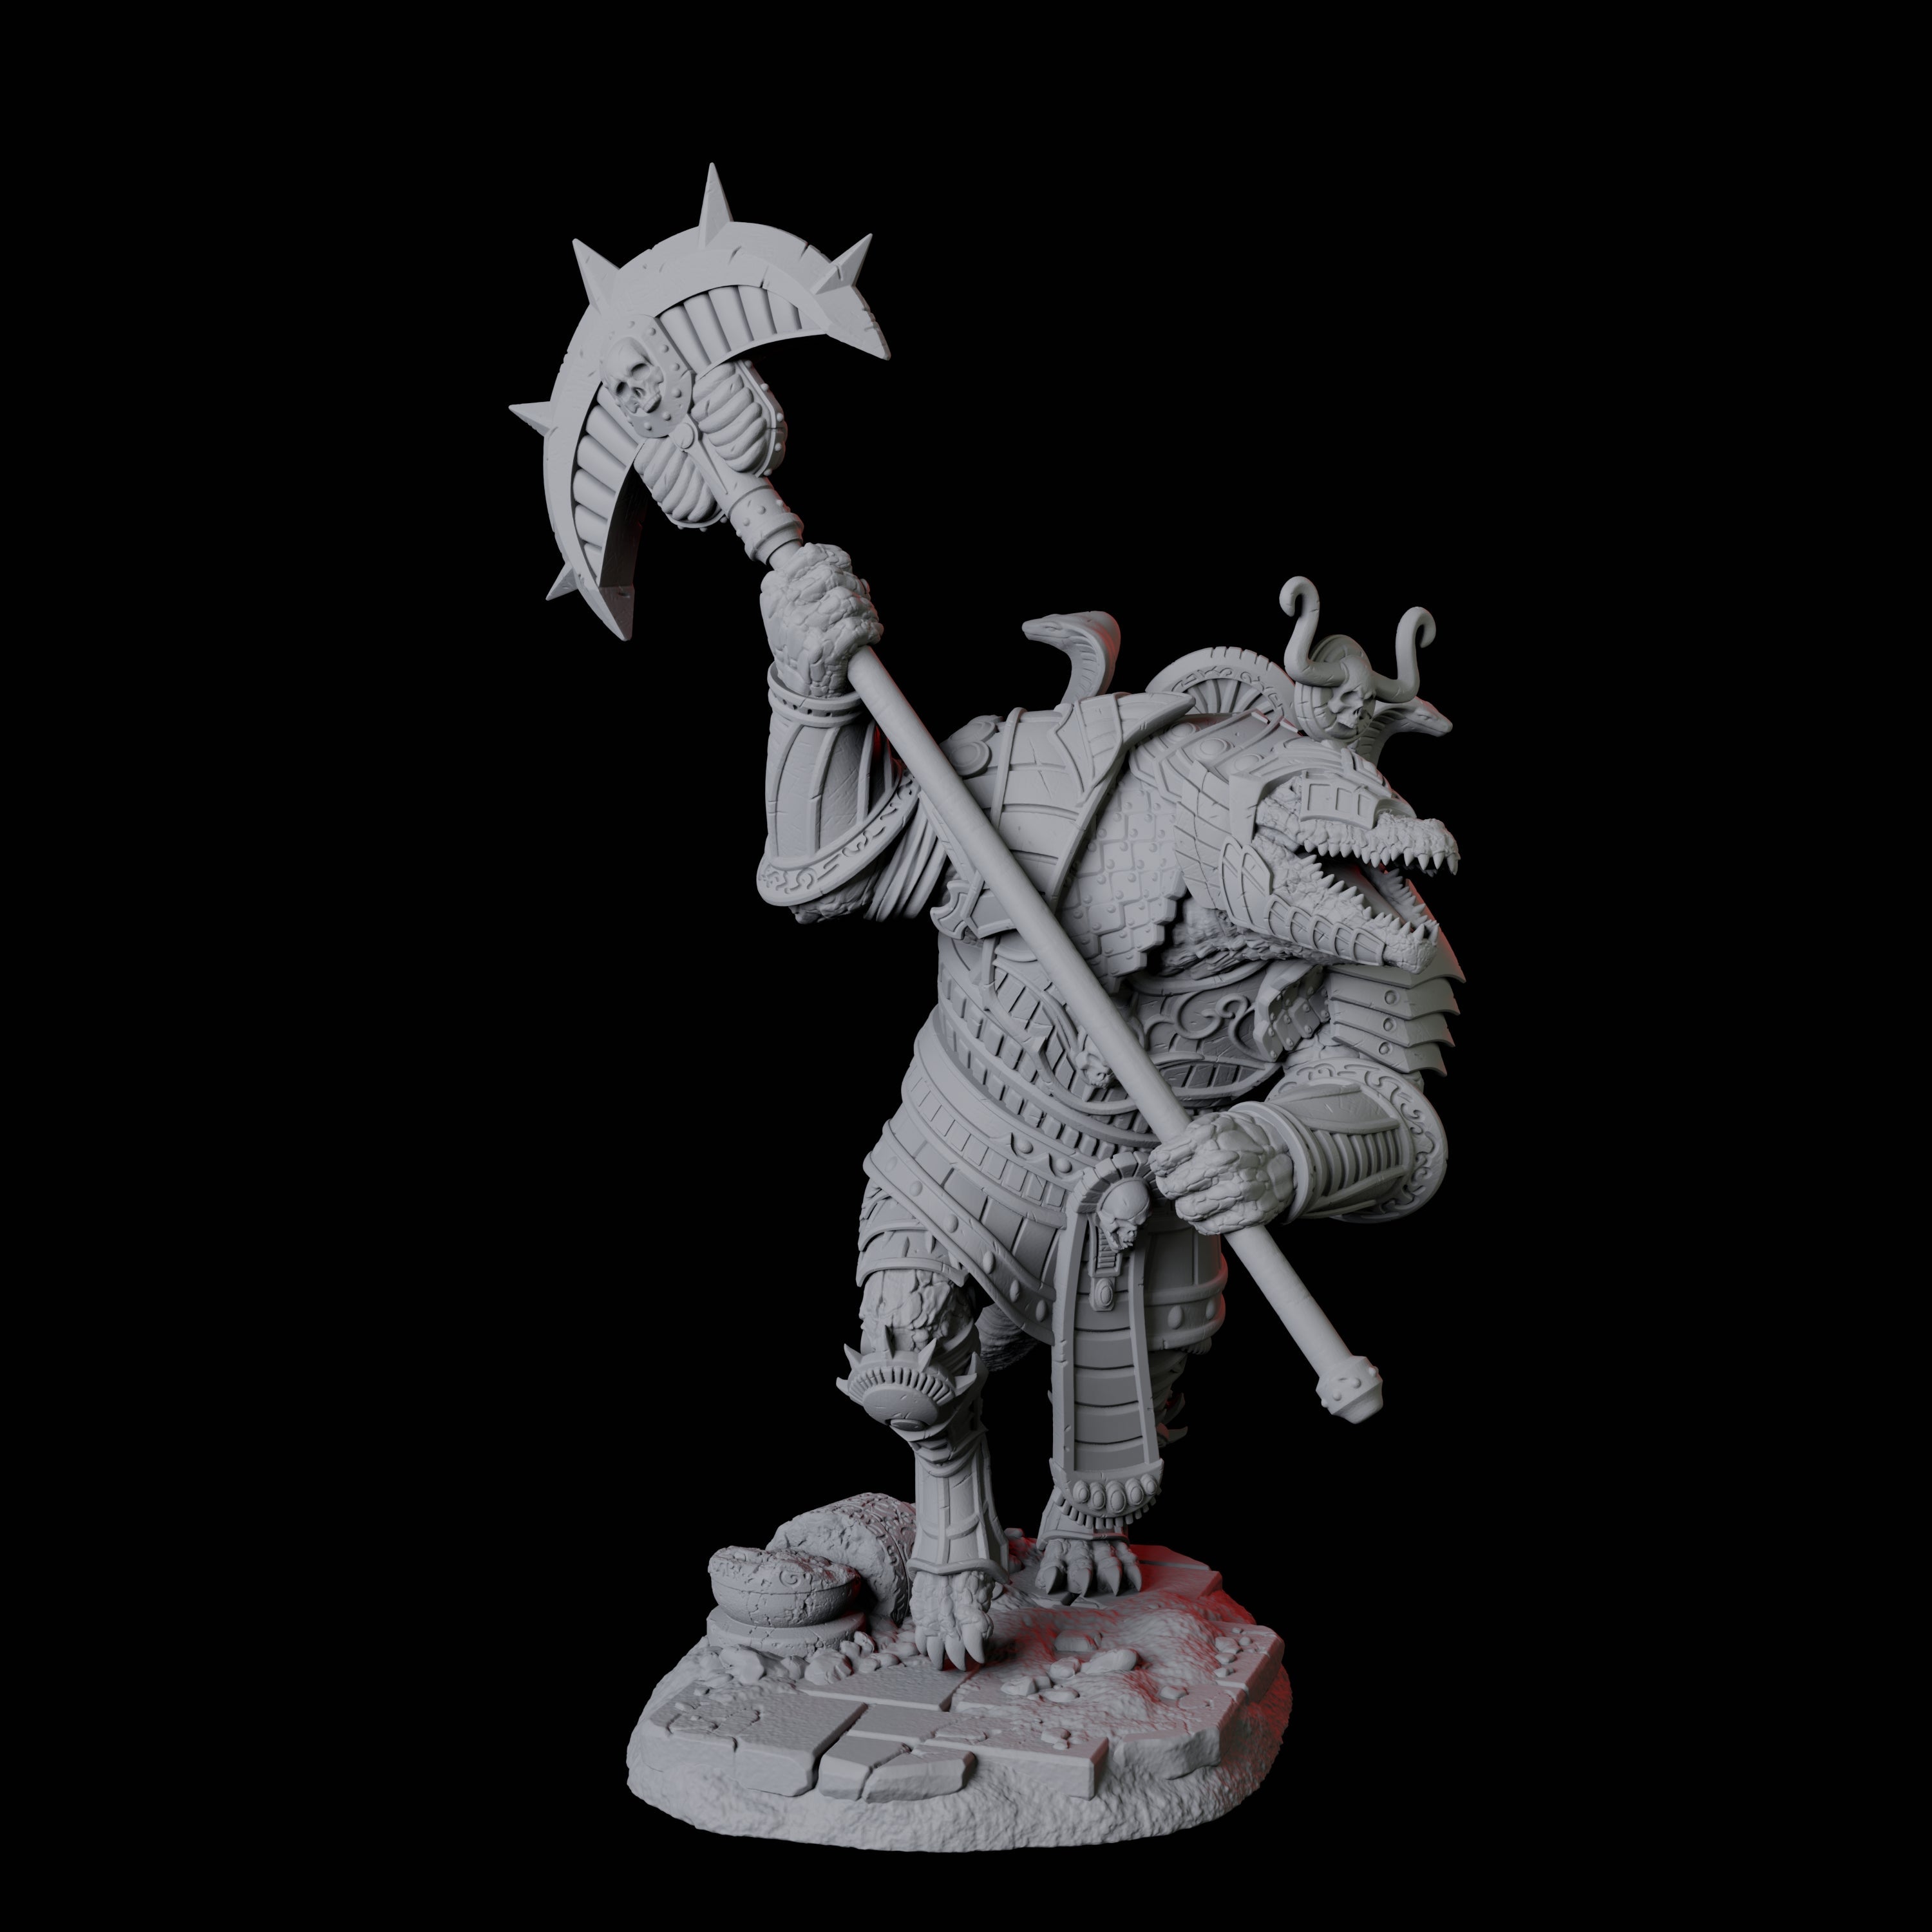 Four Charging Crocodile Lizardfolk Soldiers Miniature for Dungeons and Dragons, Pathfinder or other TTRPGs